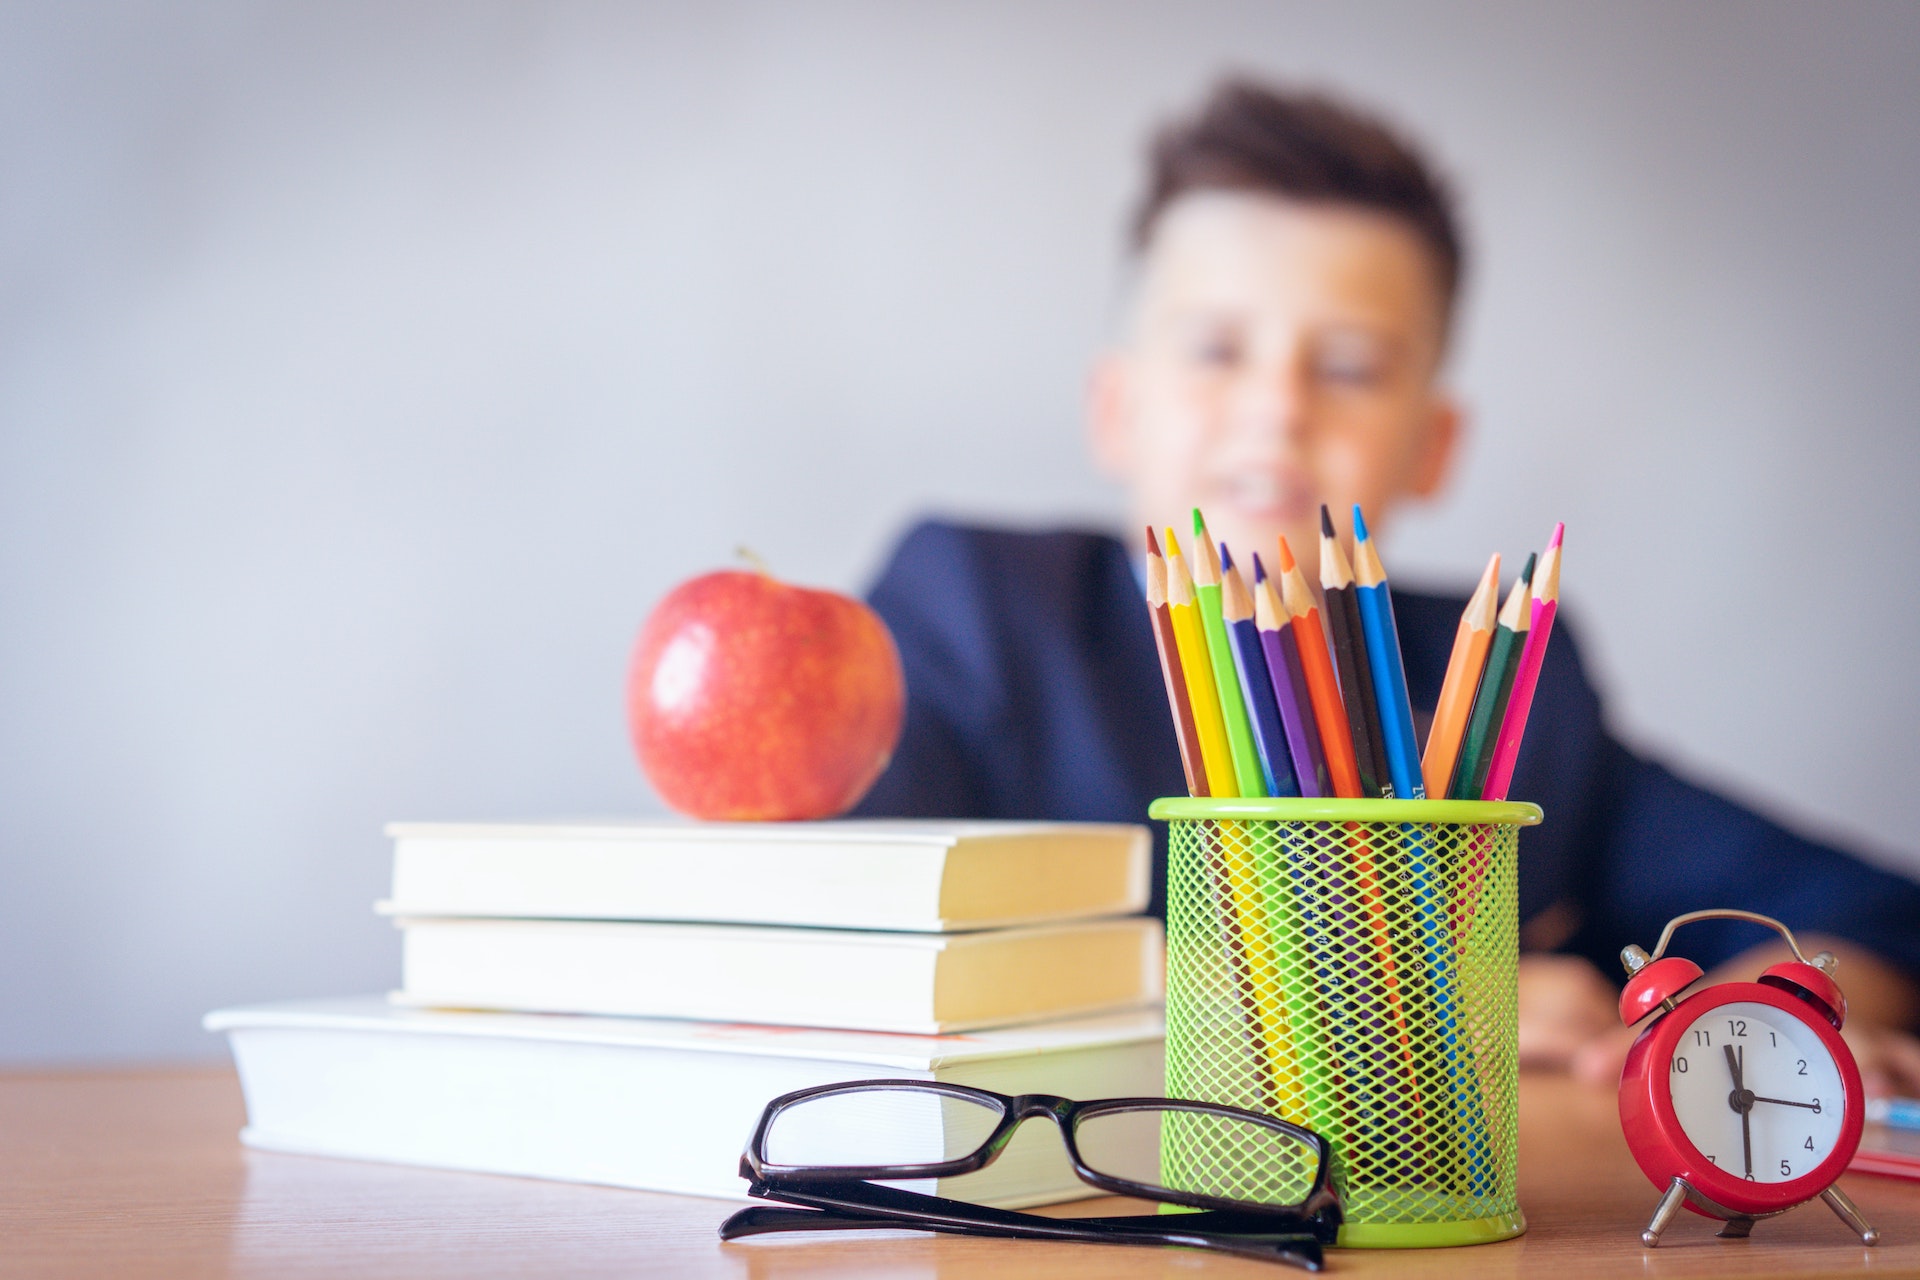 A blurred student sits behind his school materials which include an apple and glasses.